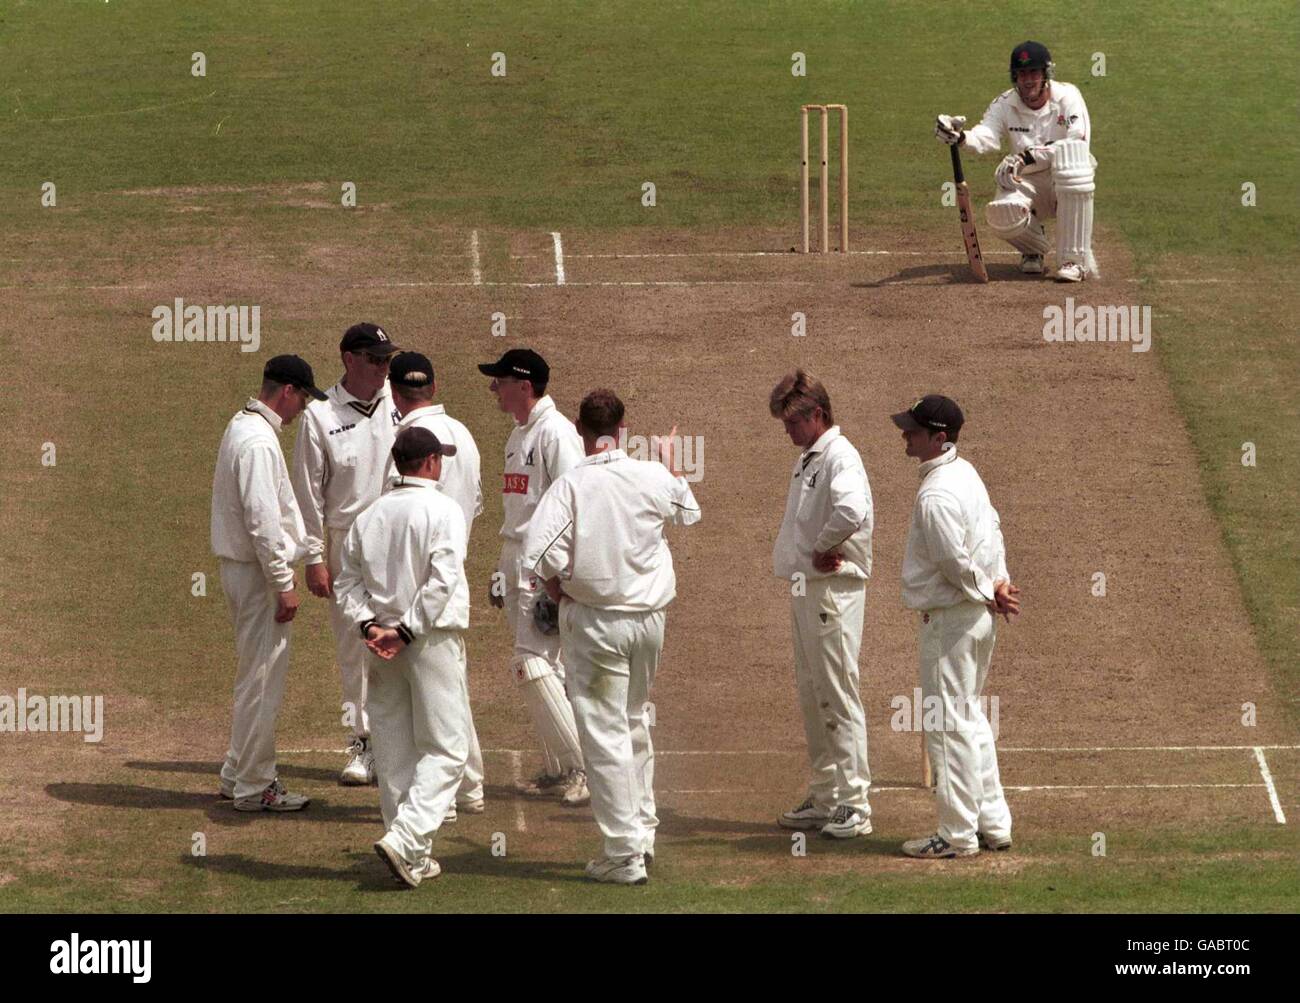 Cricket - Benson and Hedges Cup - Semi Final - Lancashire v Warwickshire. Lancashire's Mark Chilton waits at the wicket as his batting partners gradually disappear Stock Photo